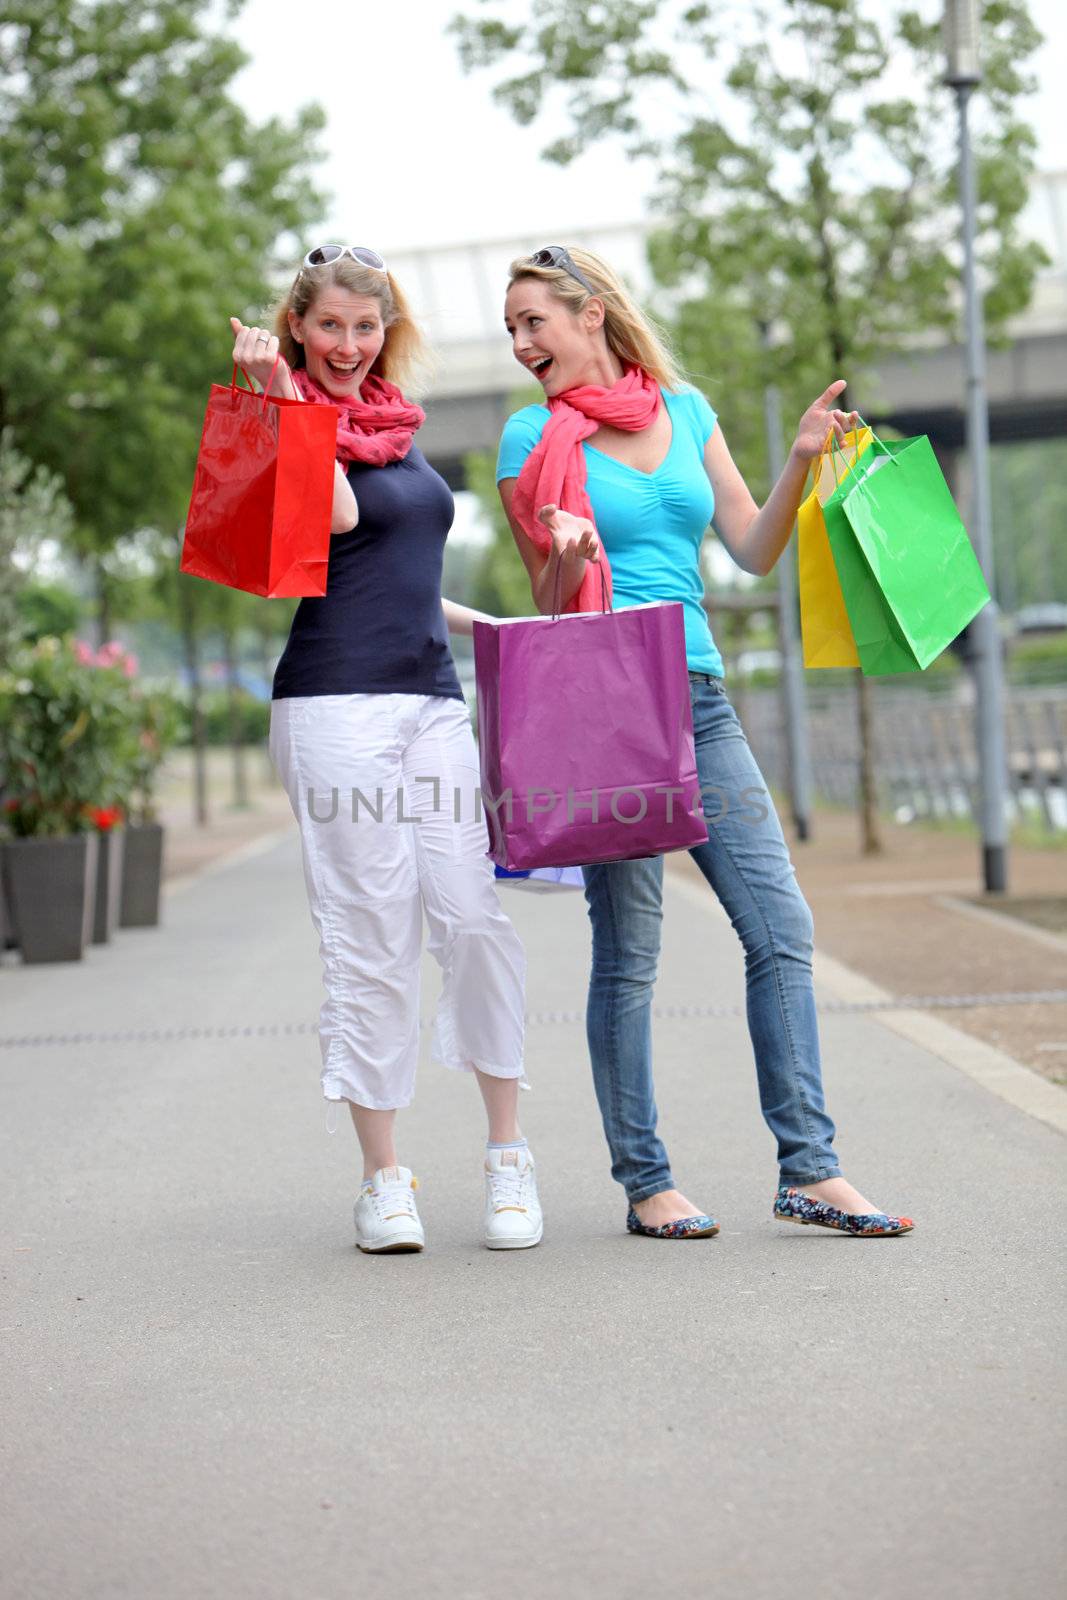 Excited women with their purchases in colourful carrier bags laughing on the sidewalk 